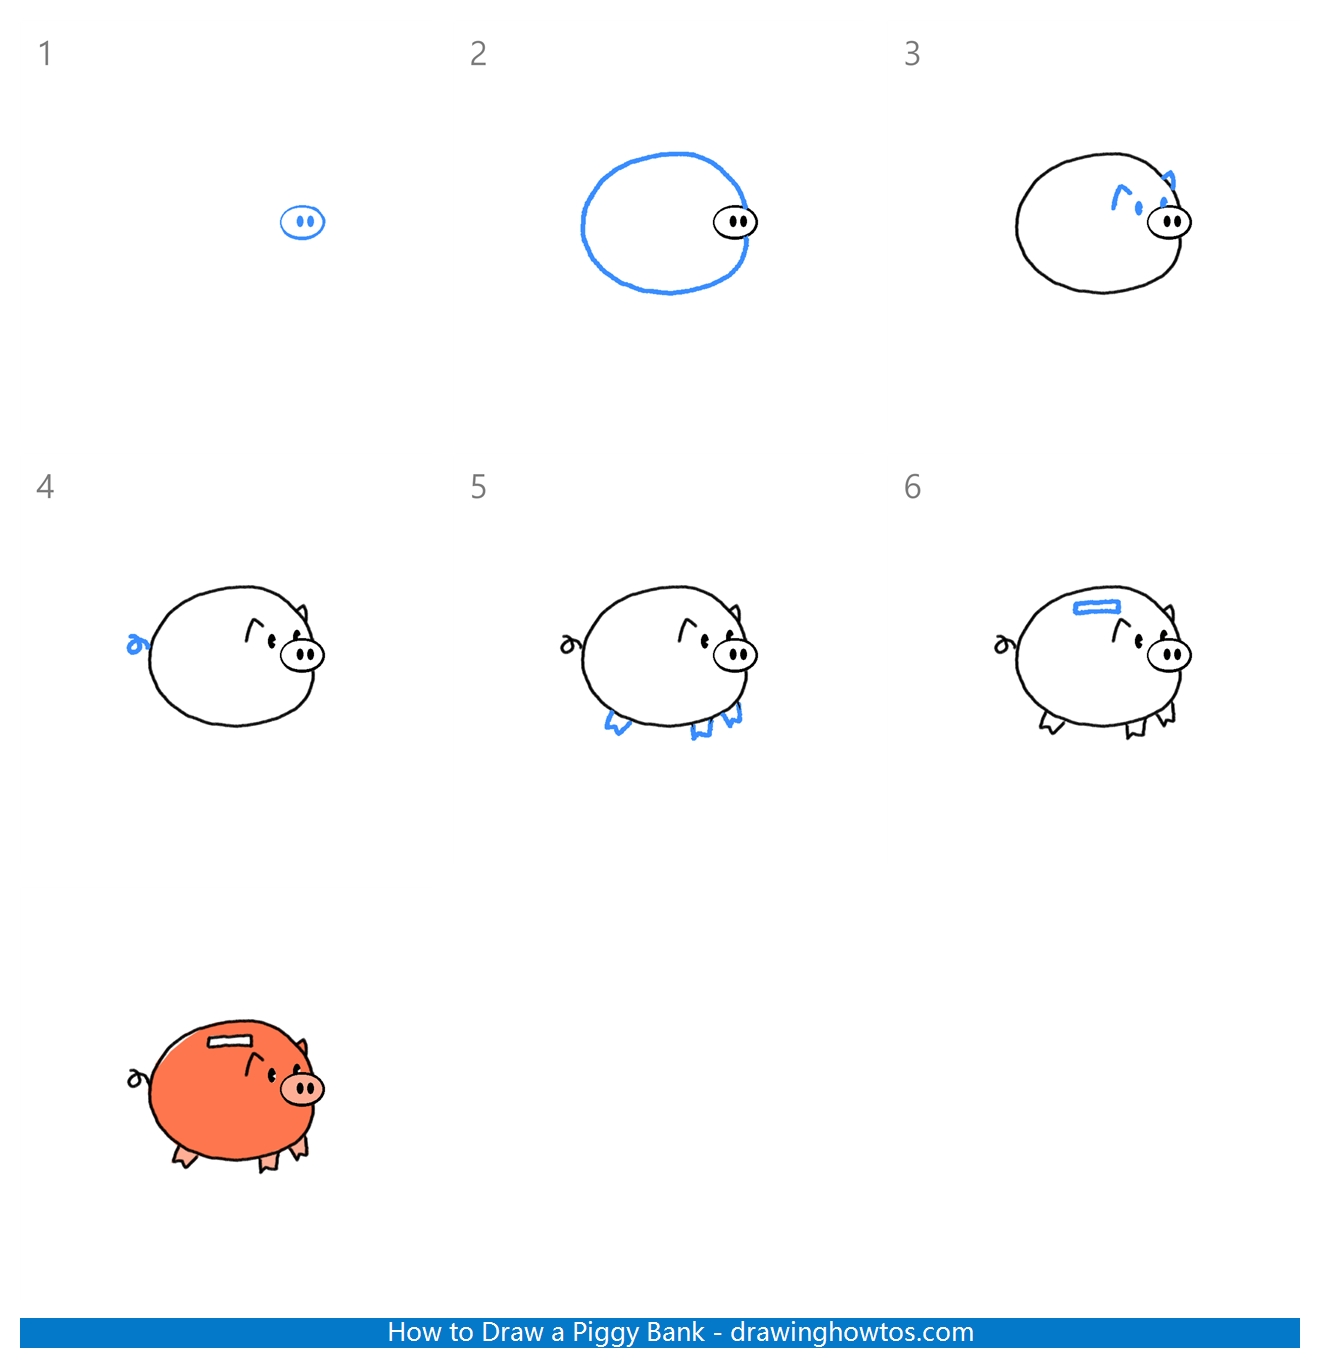 How to Draw a Piggy Bank Step by Step